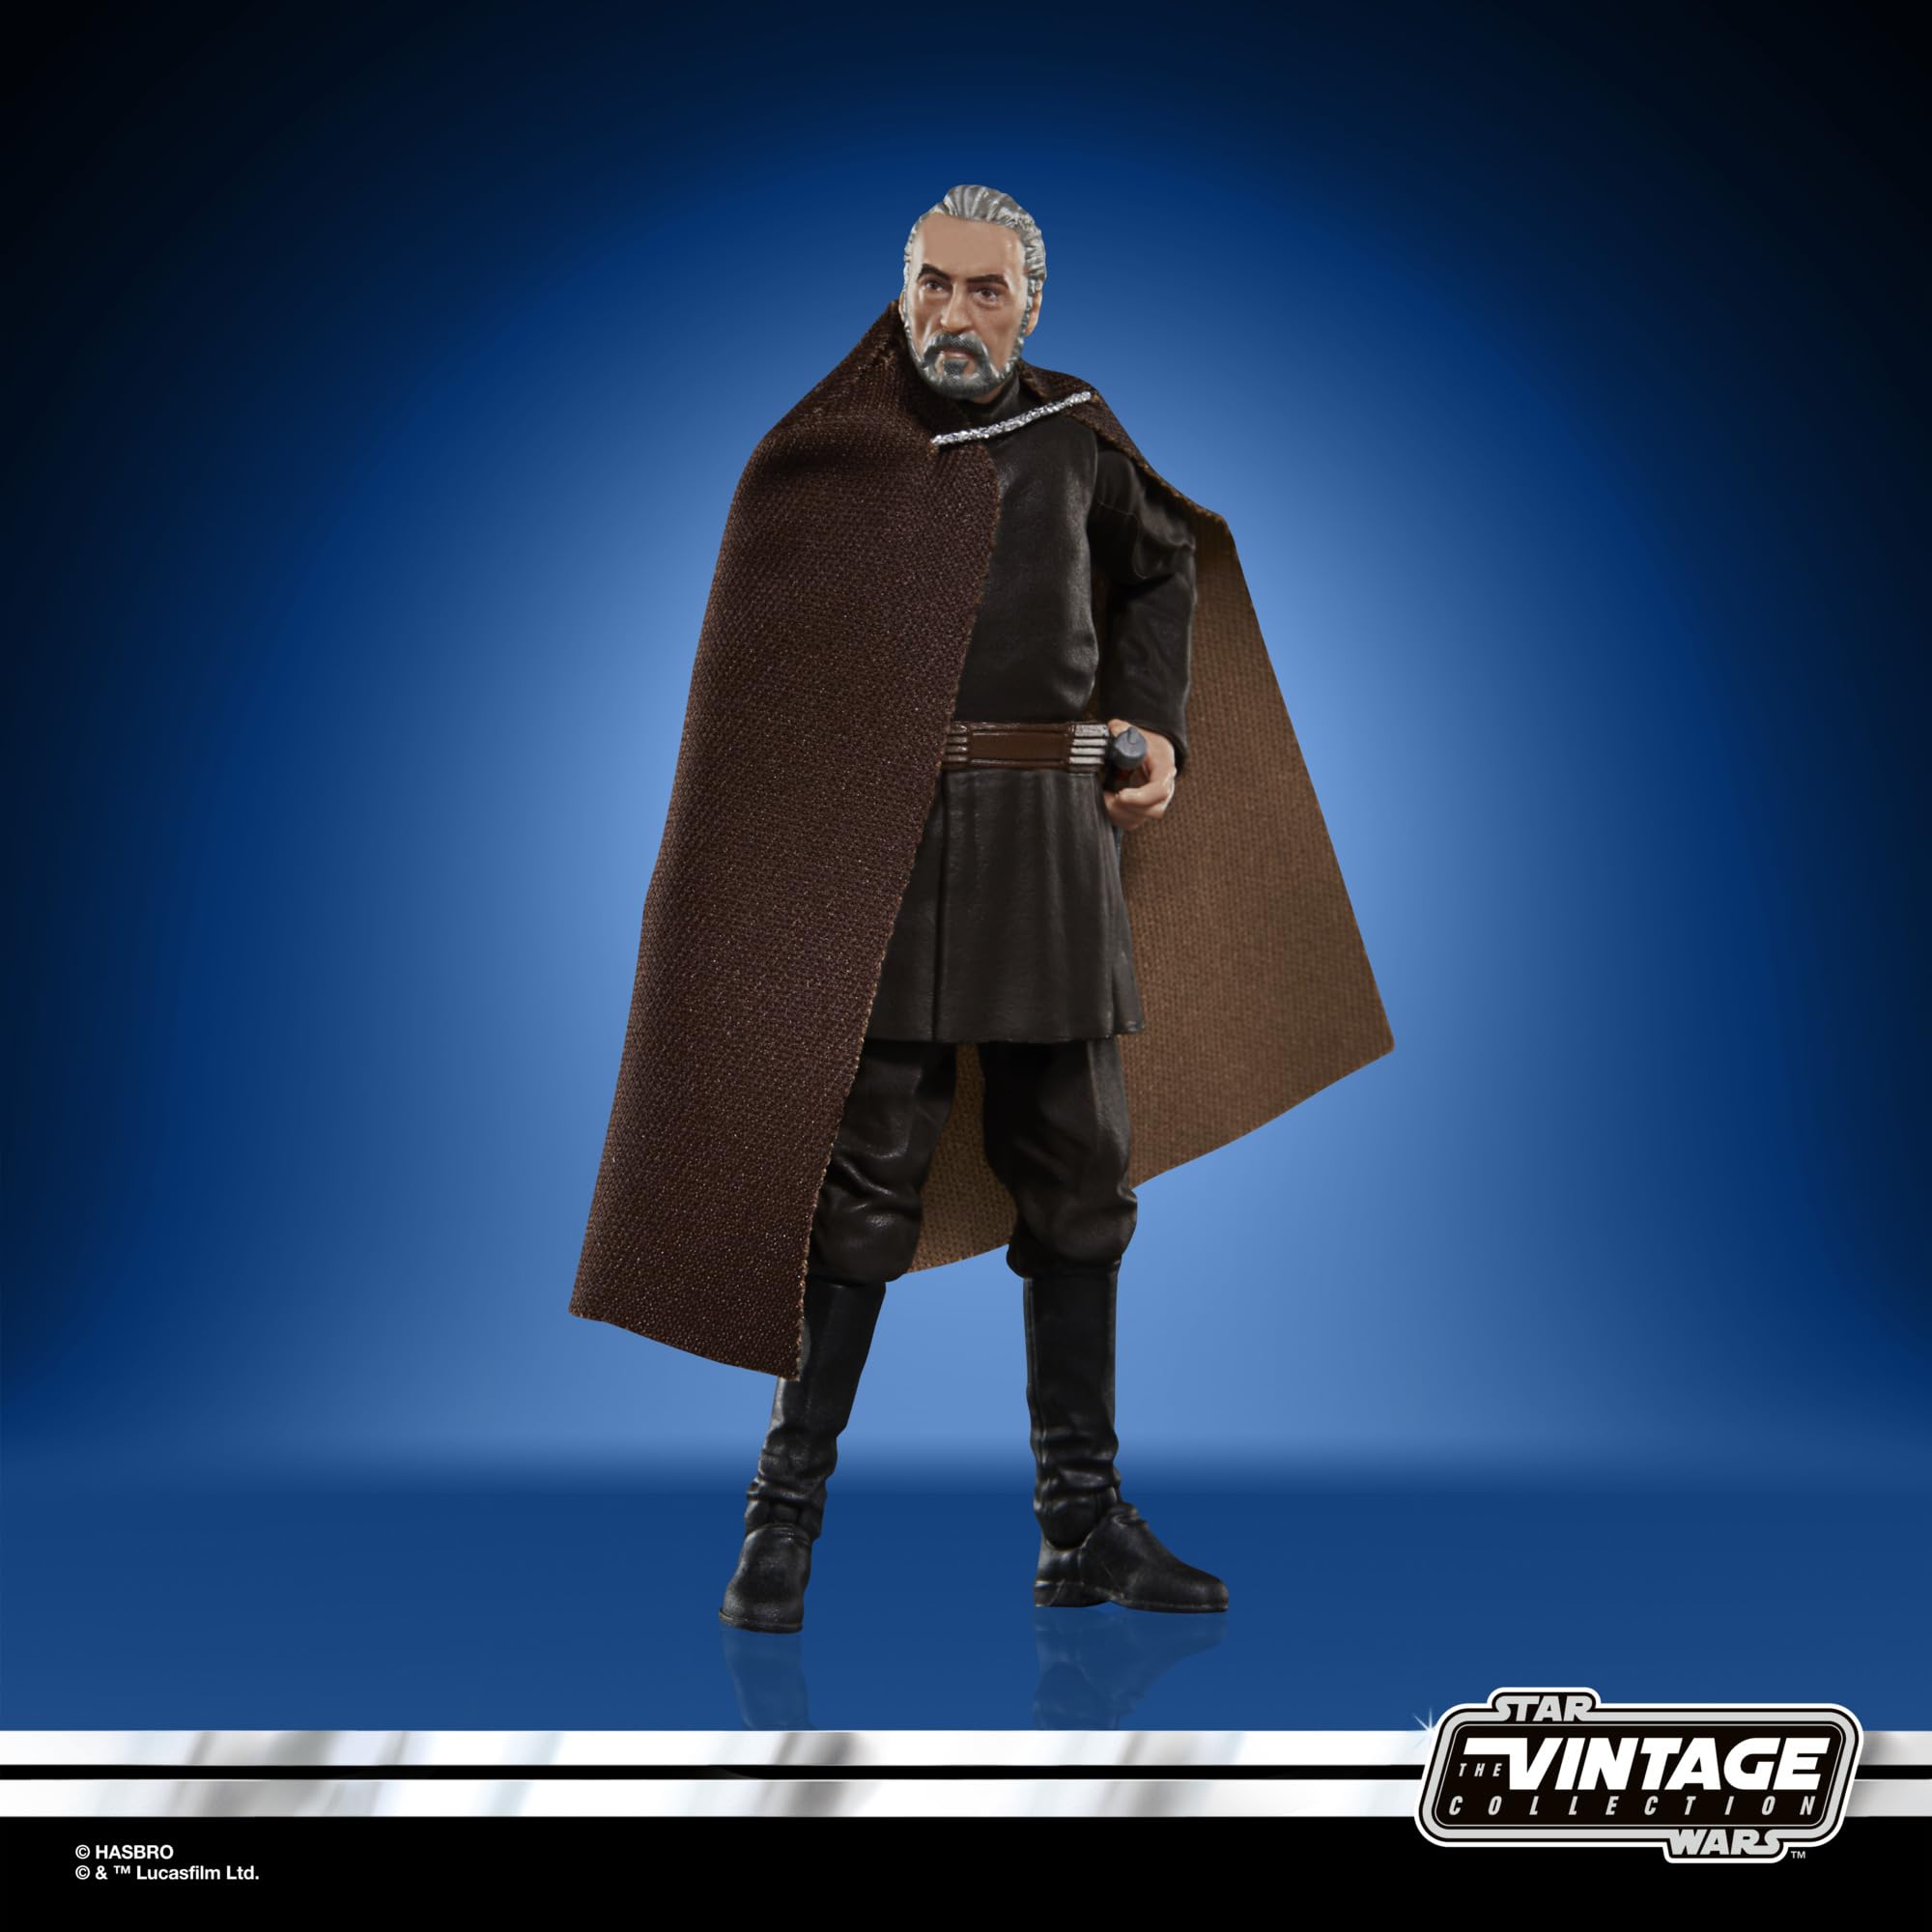 STAR WARS The Vintage Collection Count Dooku, Attack of The Clones 3.75 Inch Collectible Action Figure